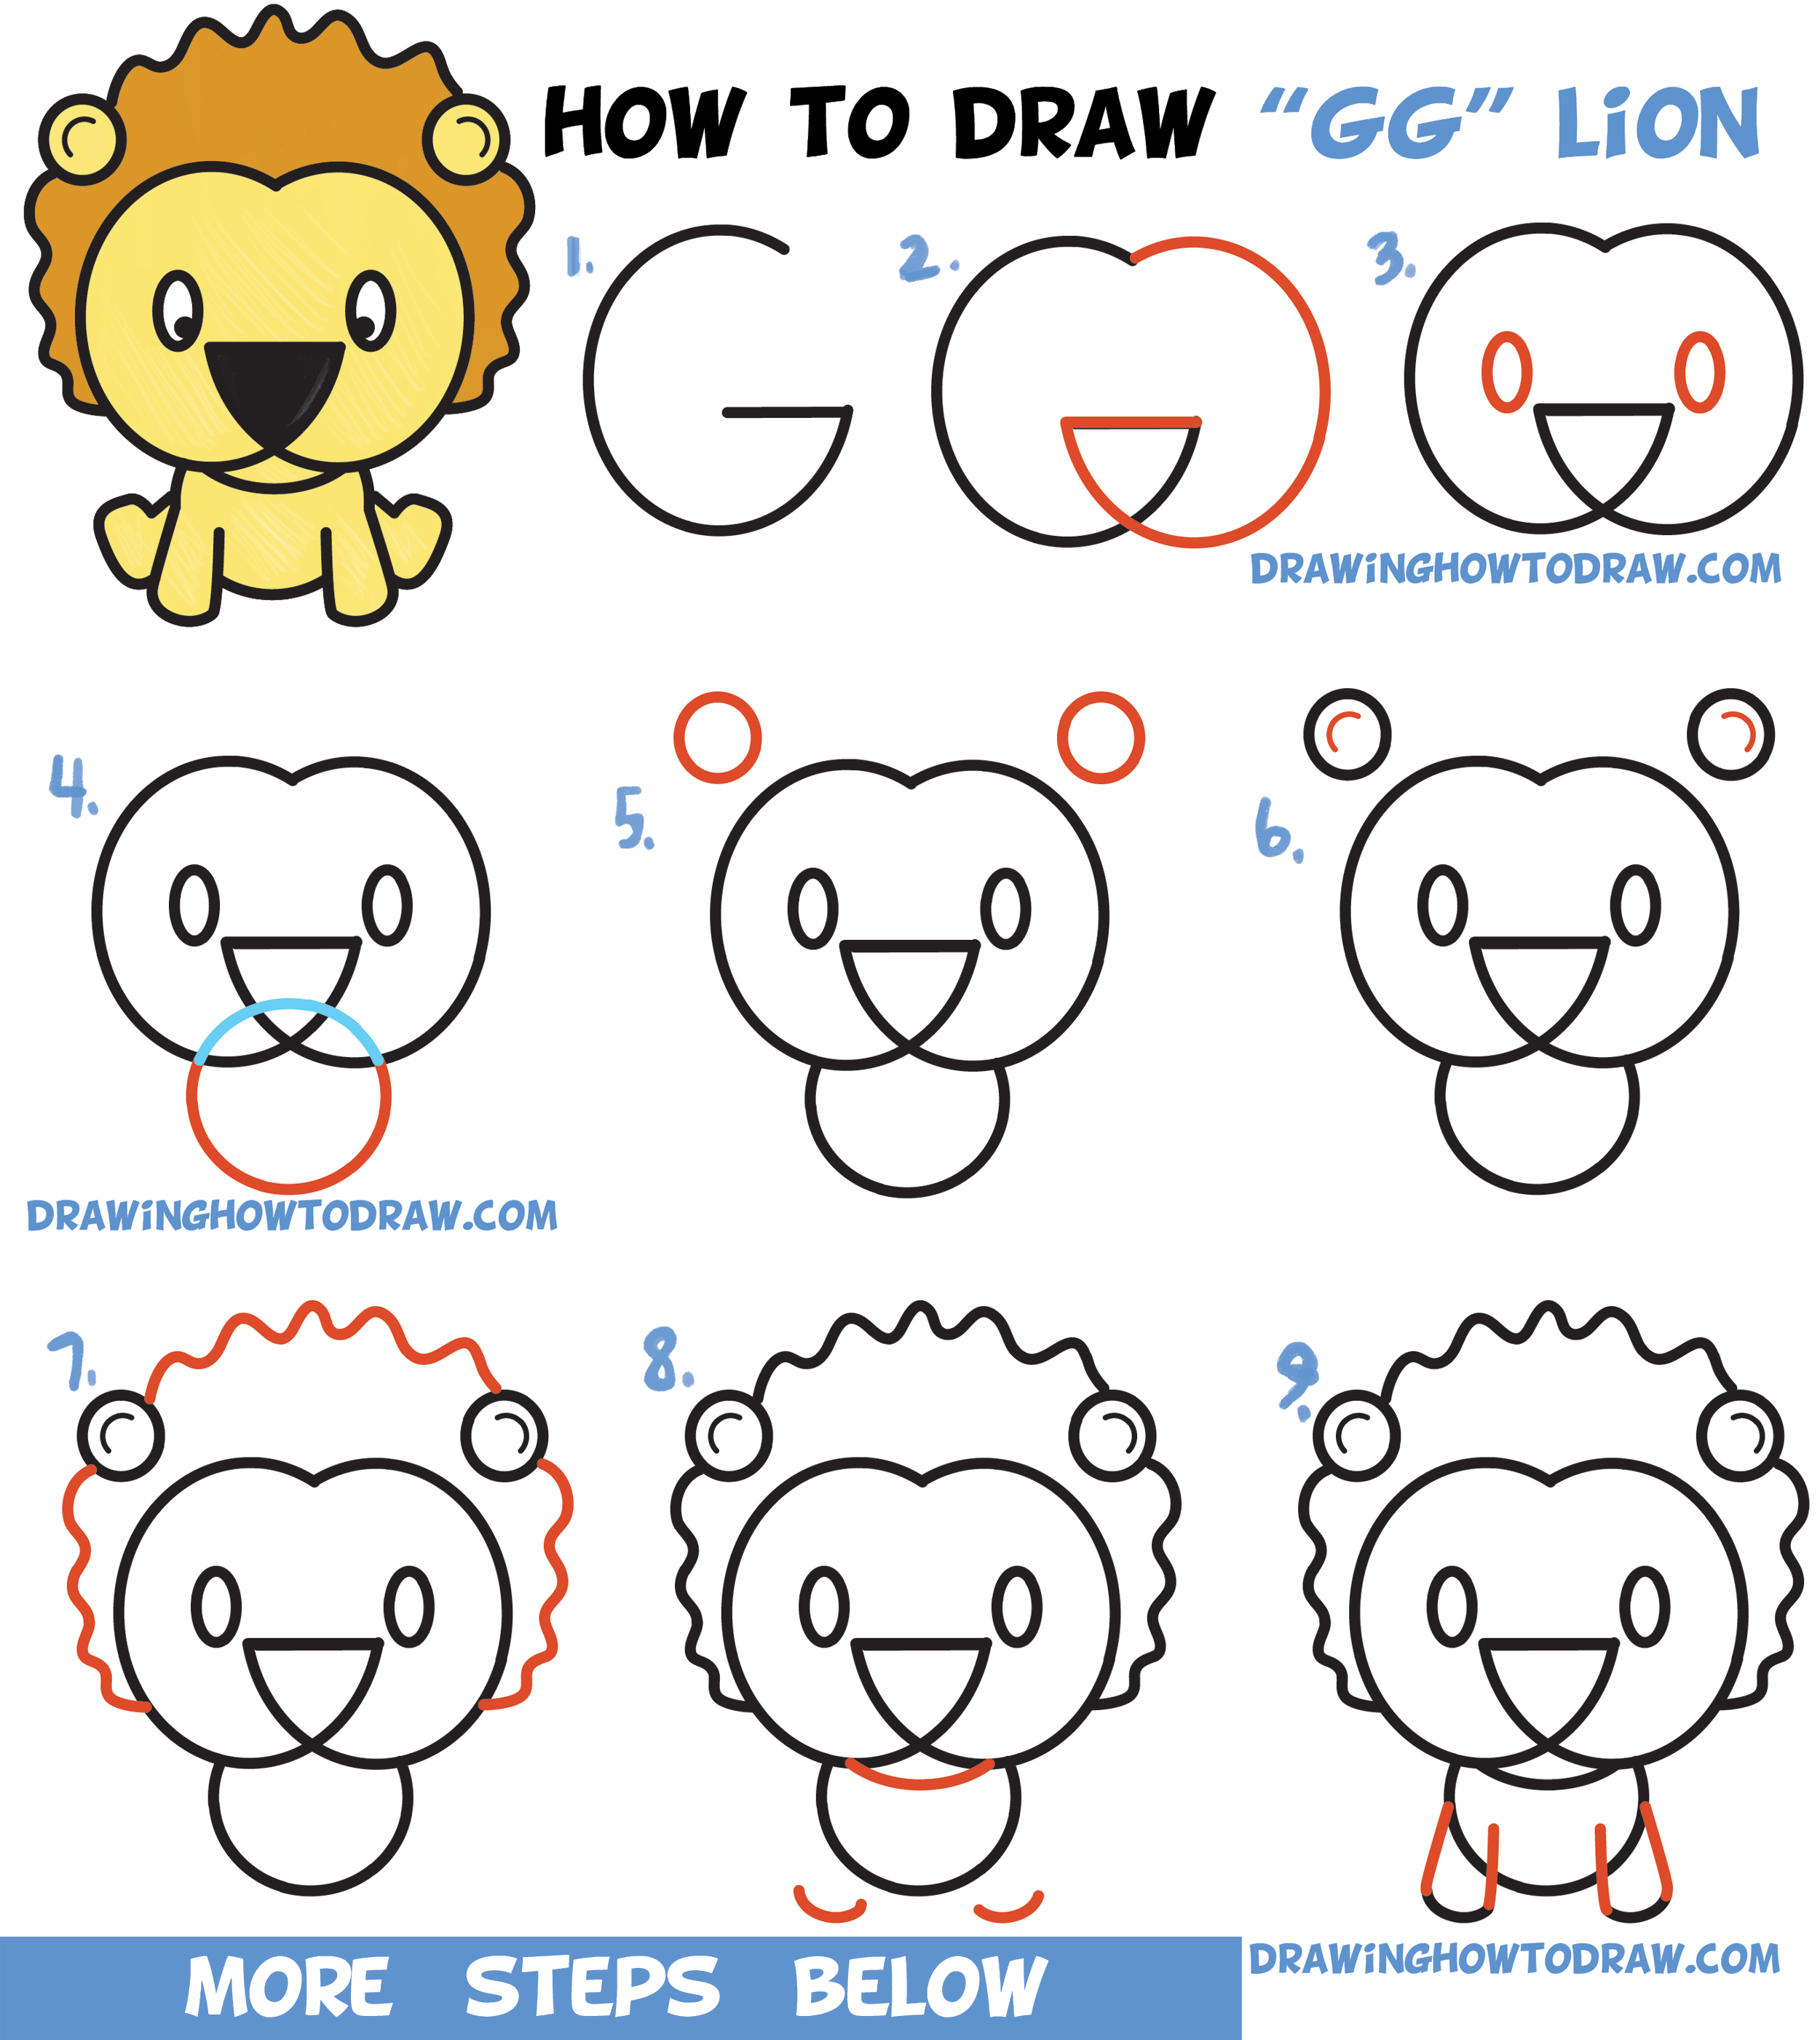 Learn How to Draw a Lion for Kids & Beginners - Video Guide